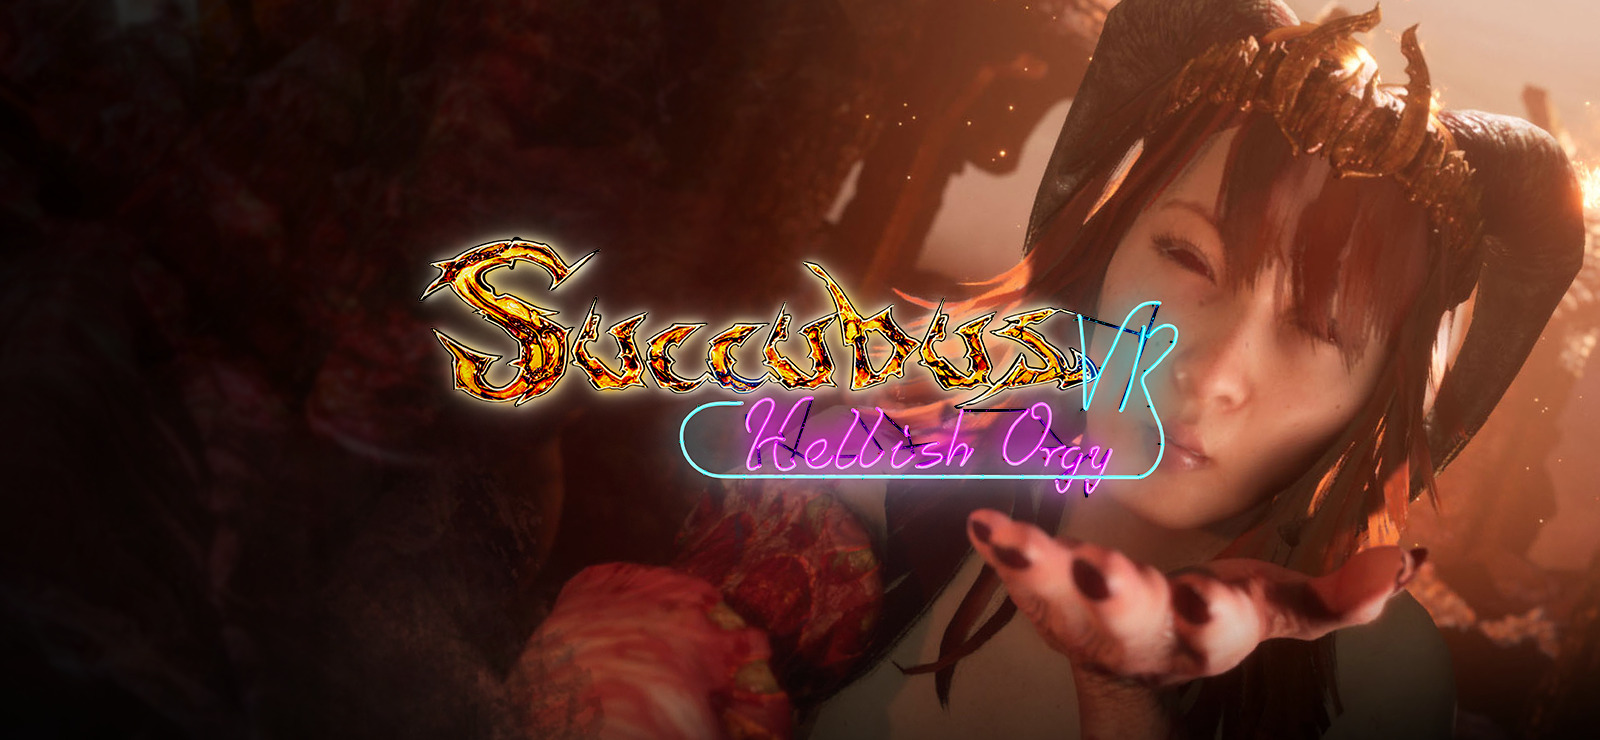 Video Game Character Orgy - 15% Succubus - Hellish Orgy VR on GOG.com